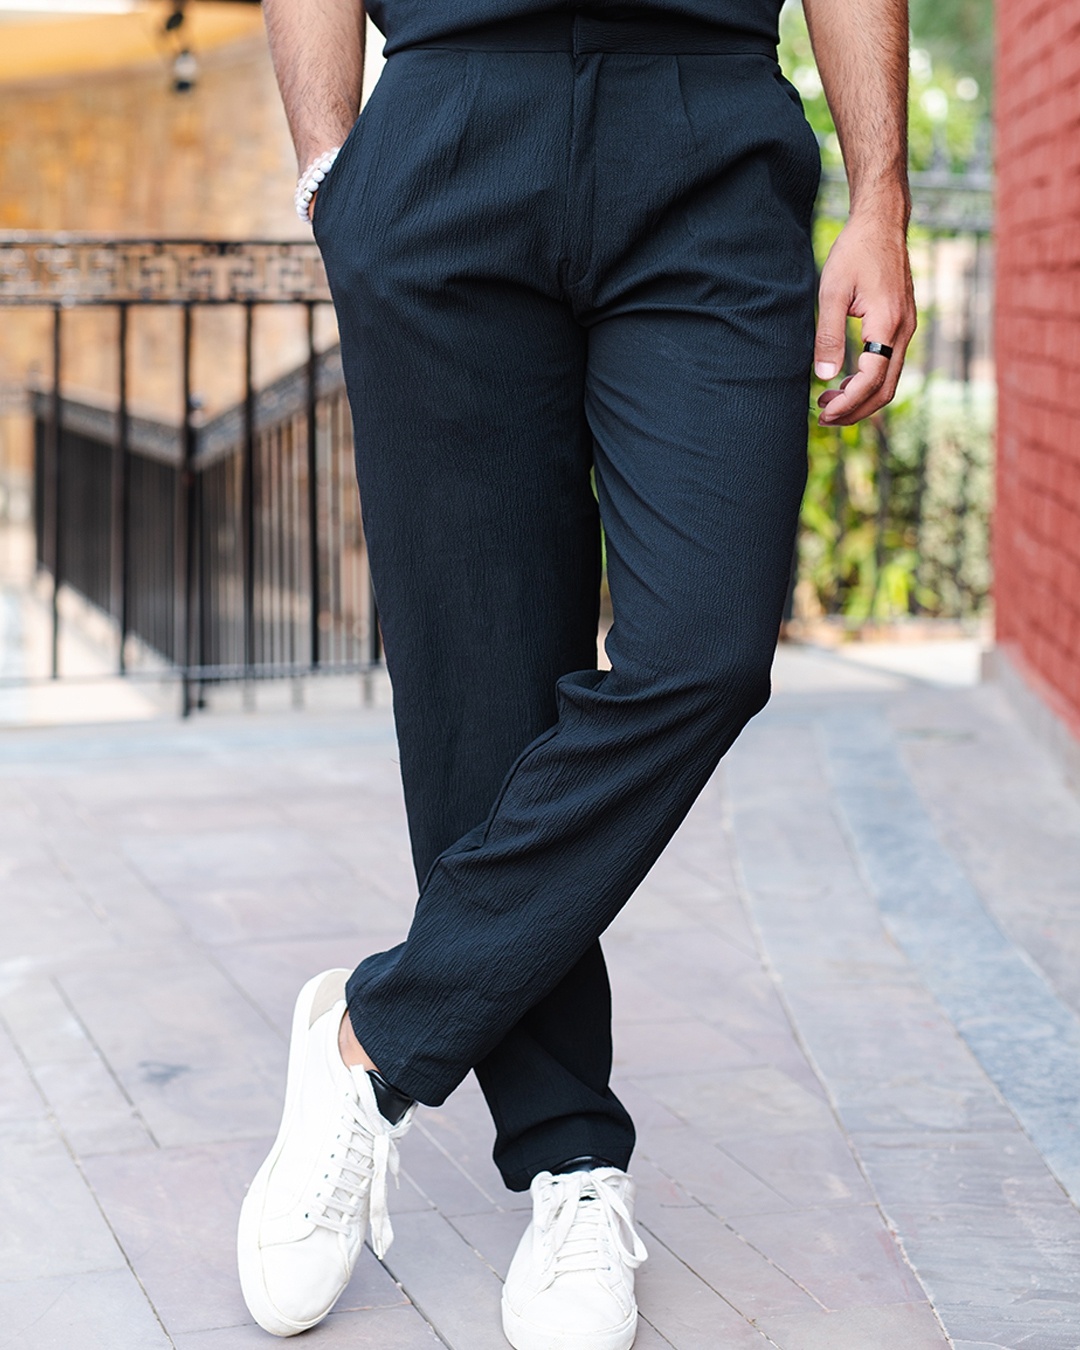 Casual Pant in Black Color For Men Made from Sheep Leather PT12